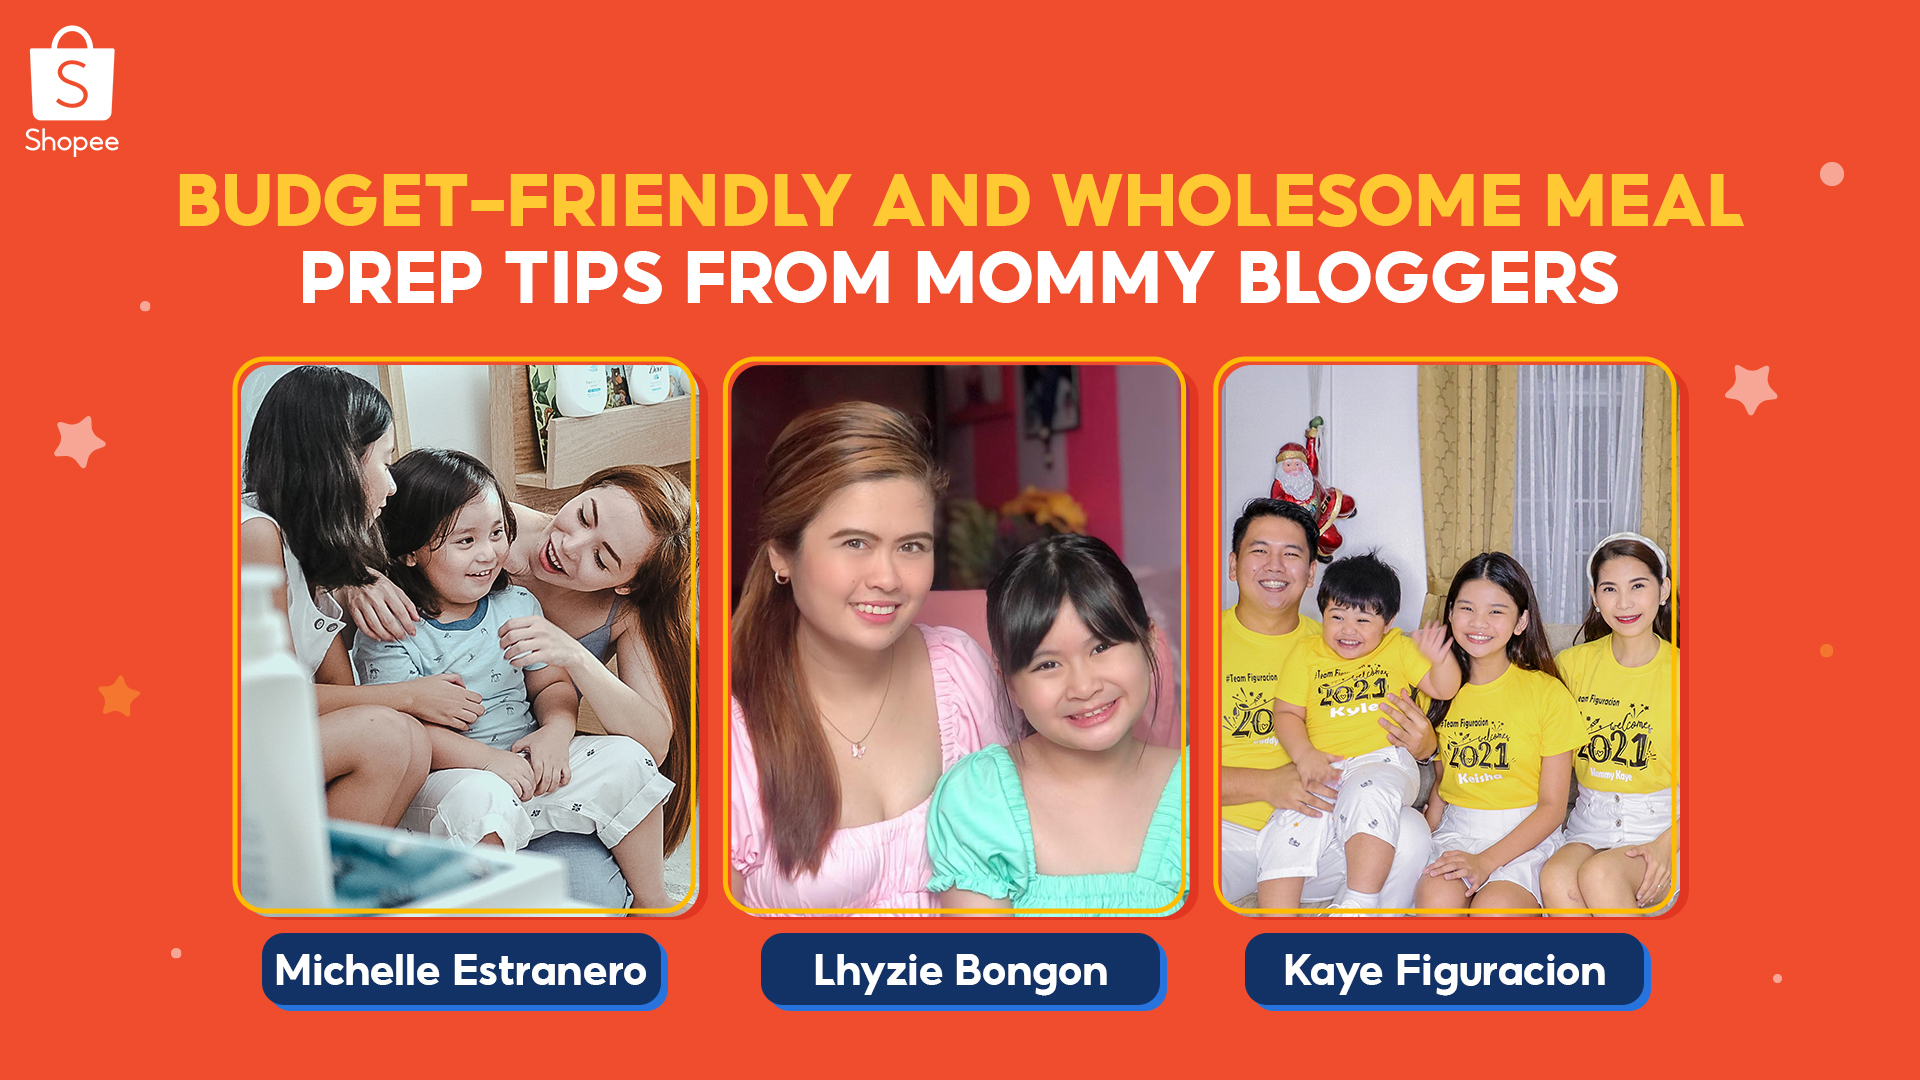 Try these Wholesome Recipes and Budget-Friendly Shopee Recommendations from Local Mommy Bloggers